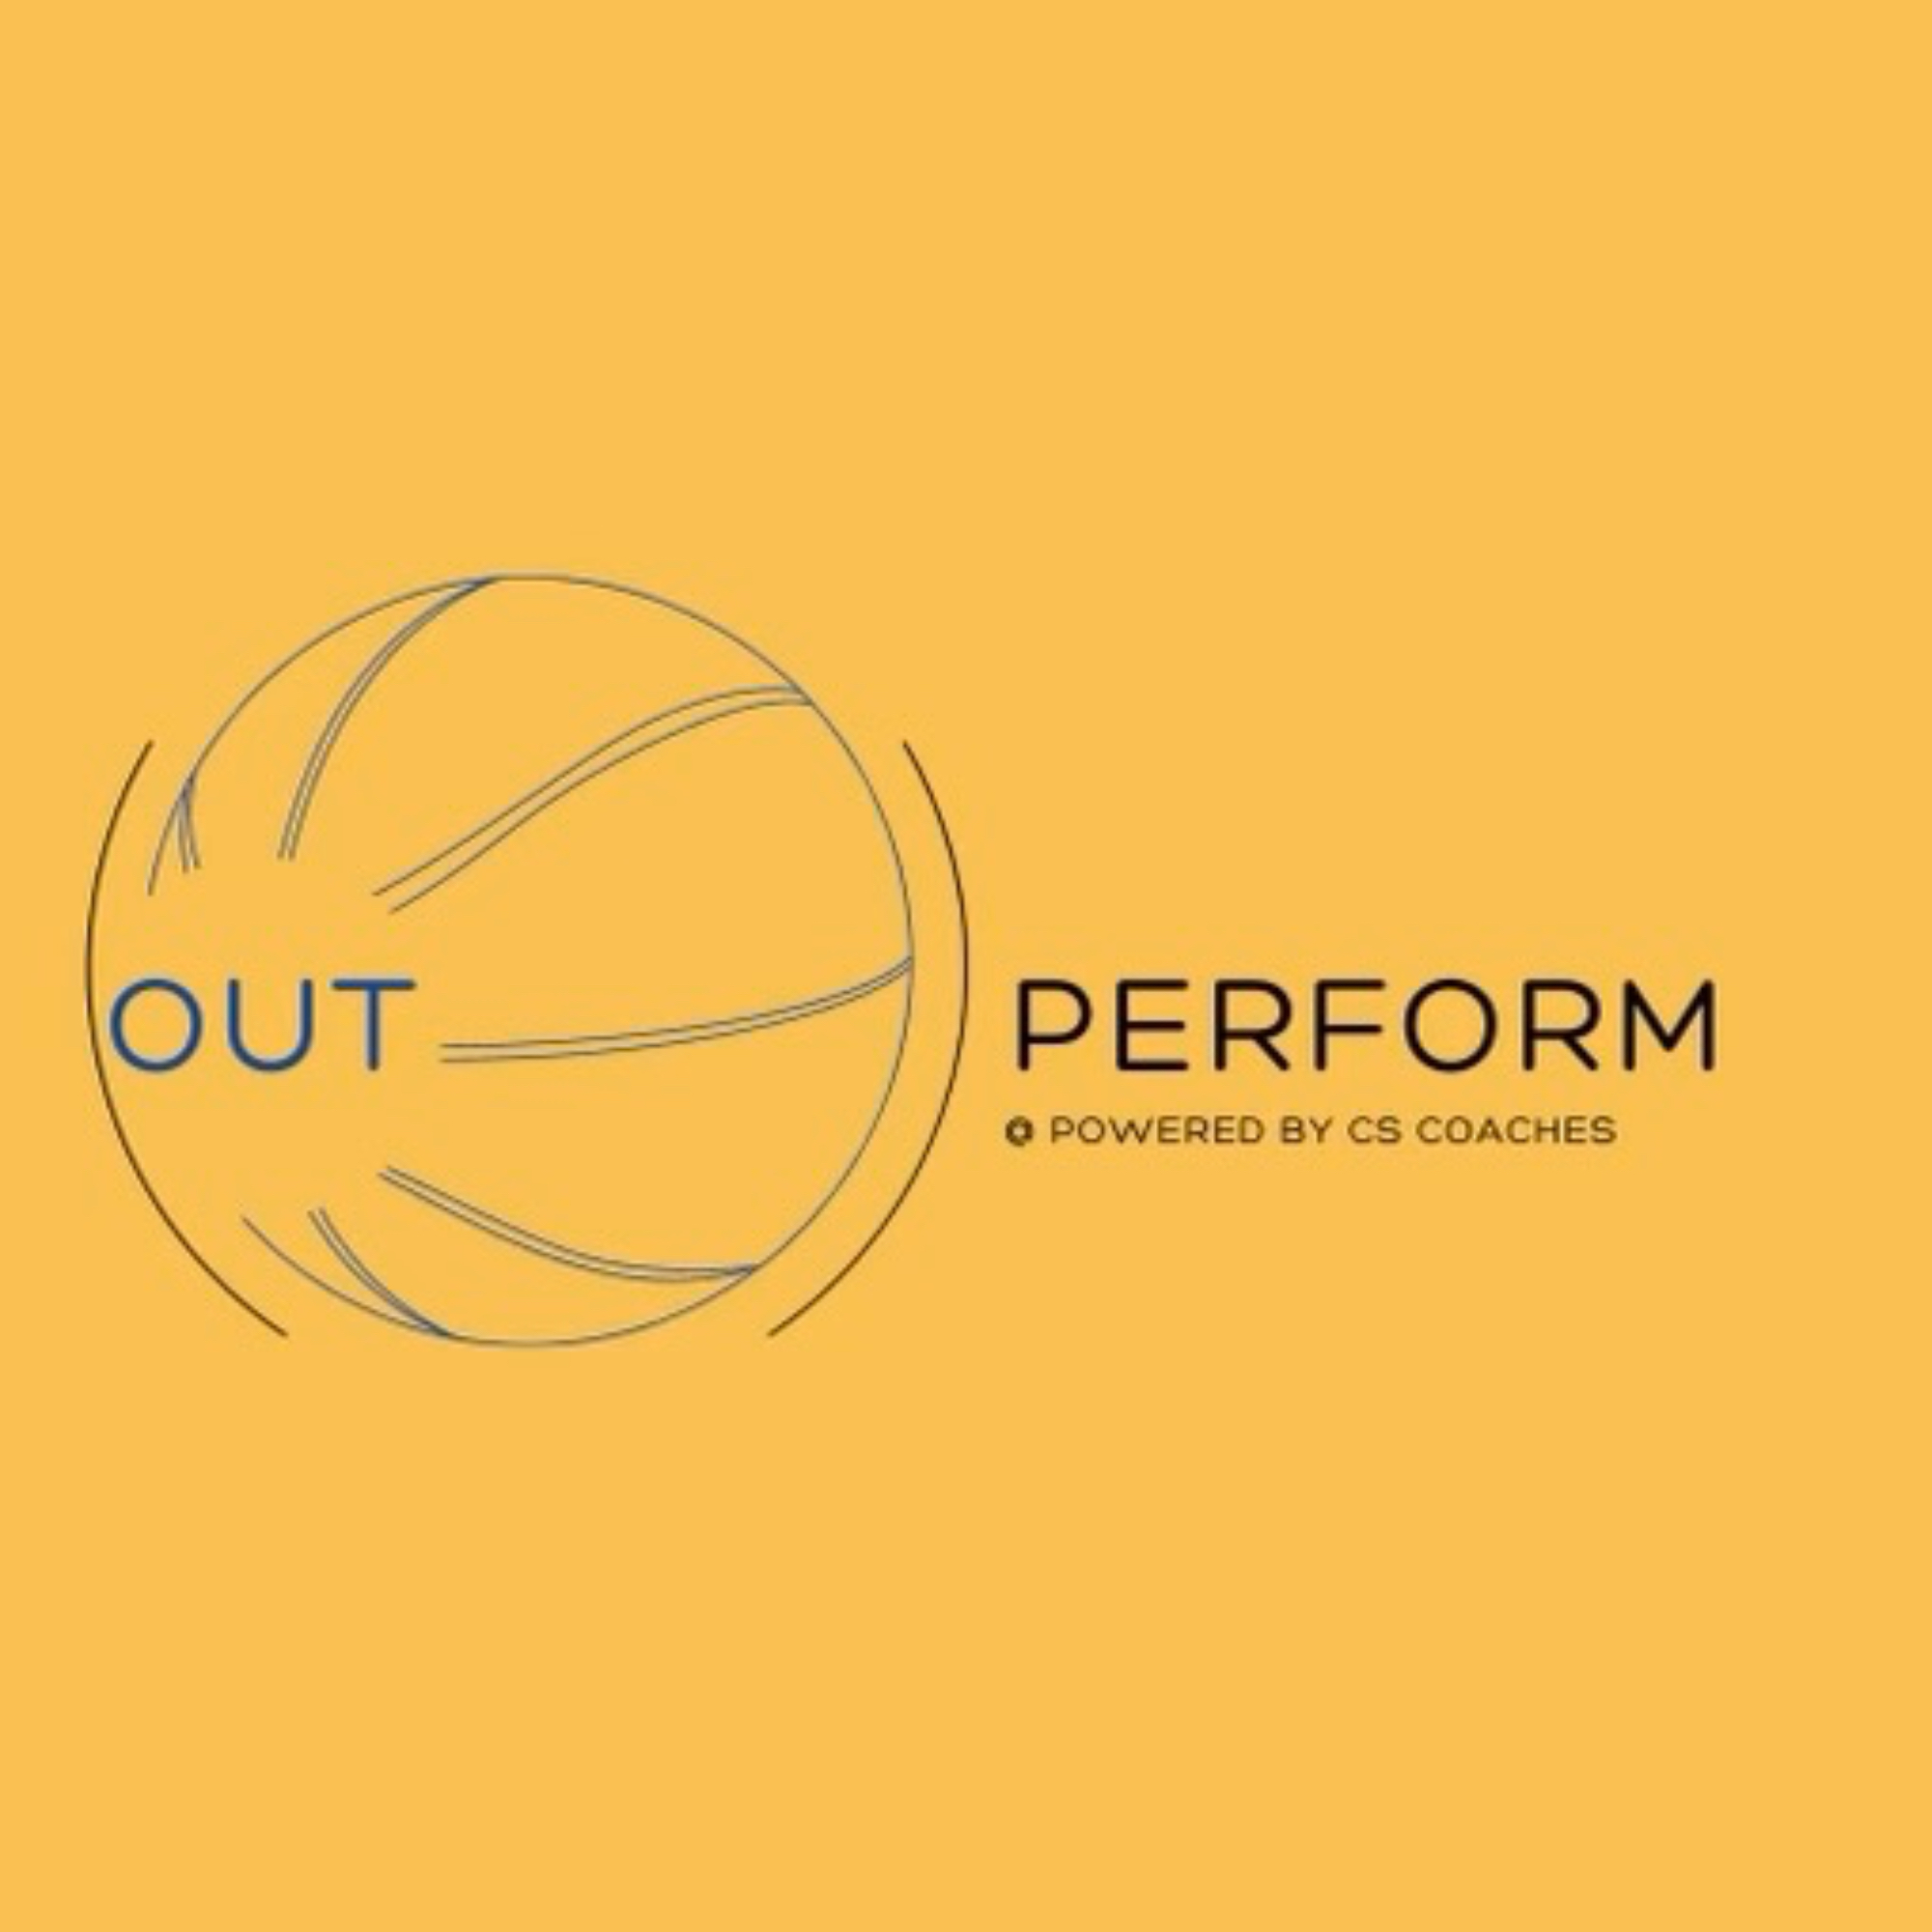 The official logo of OutPerfrom